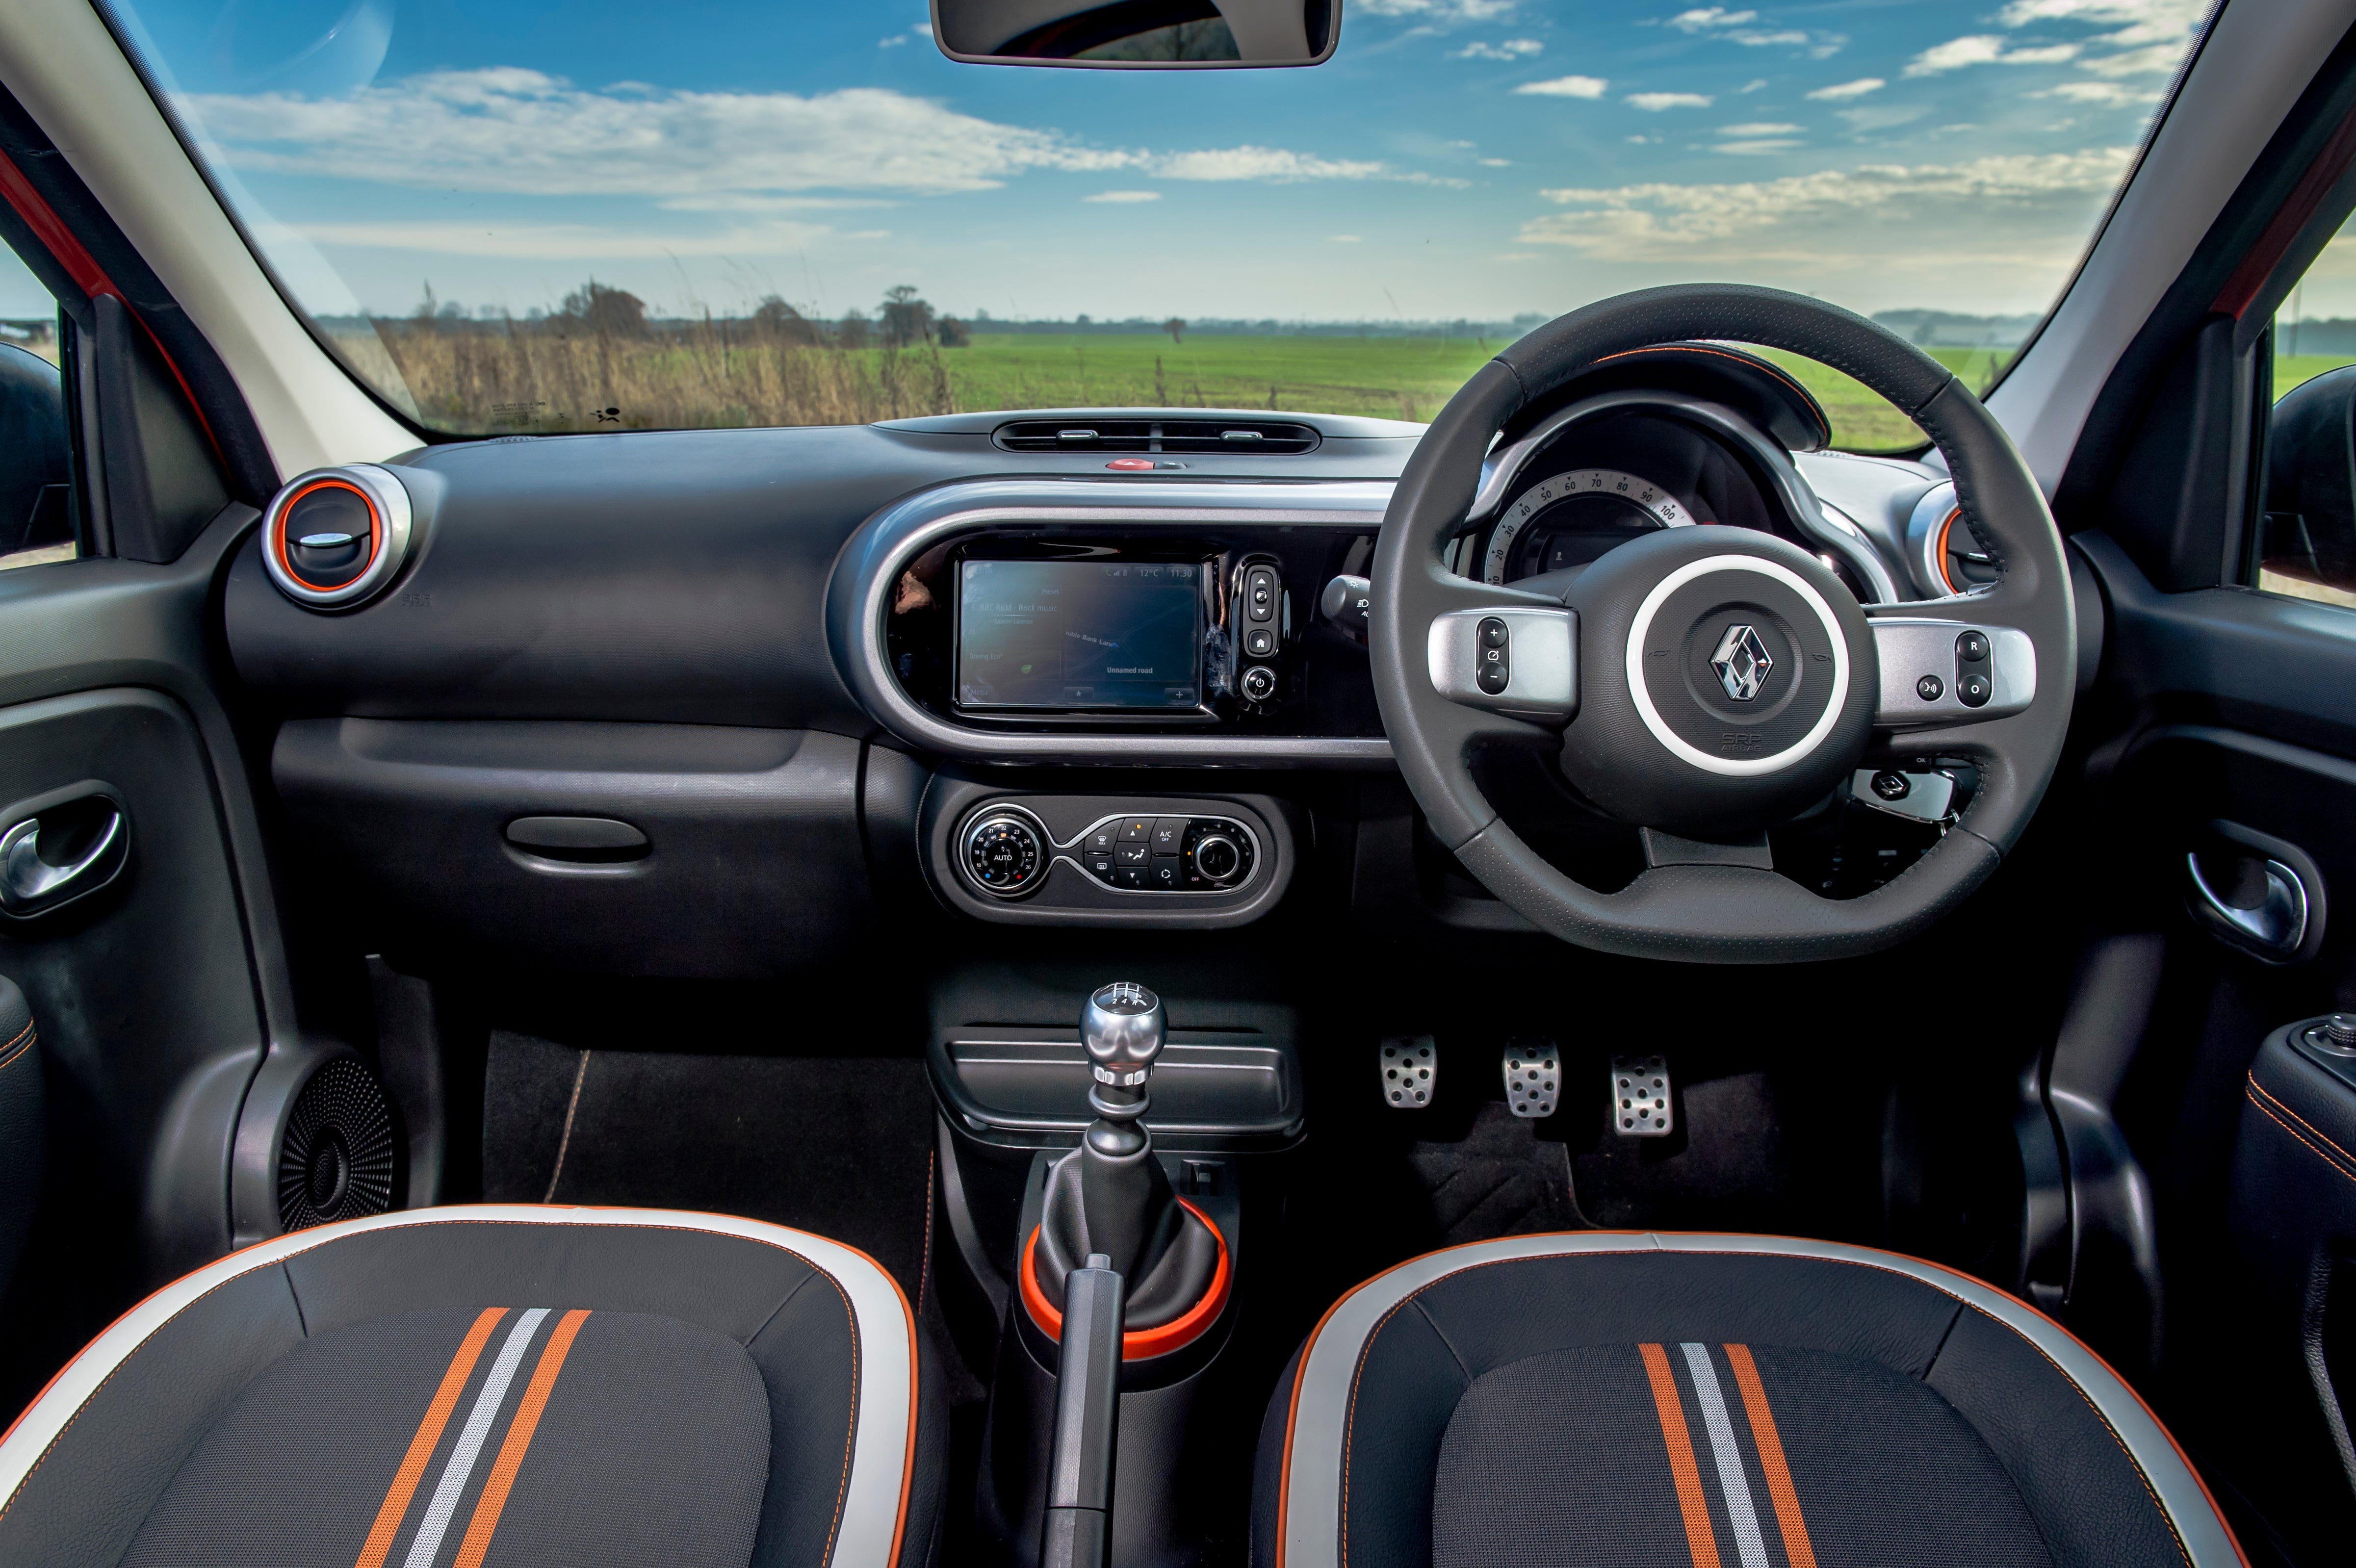 Renault Twingo (2014-2019) Review